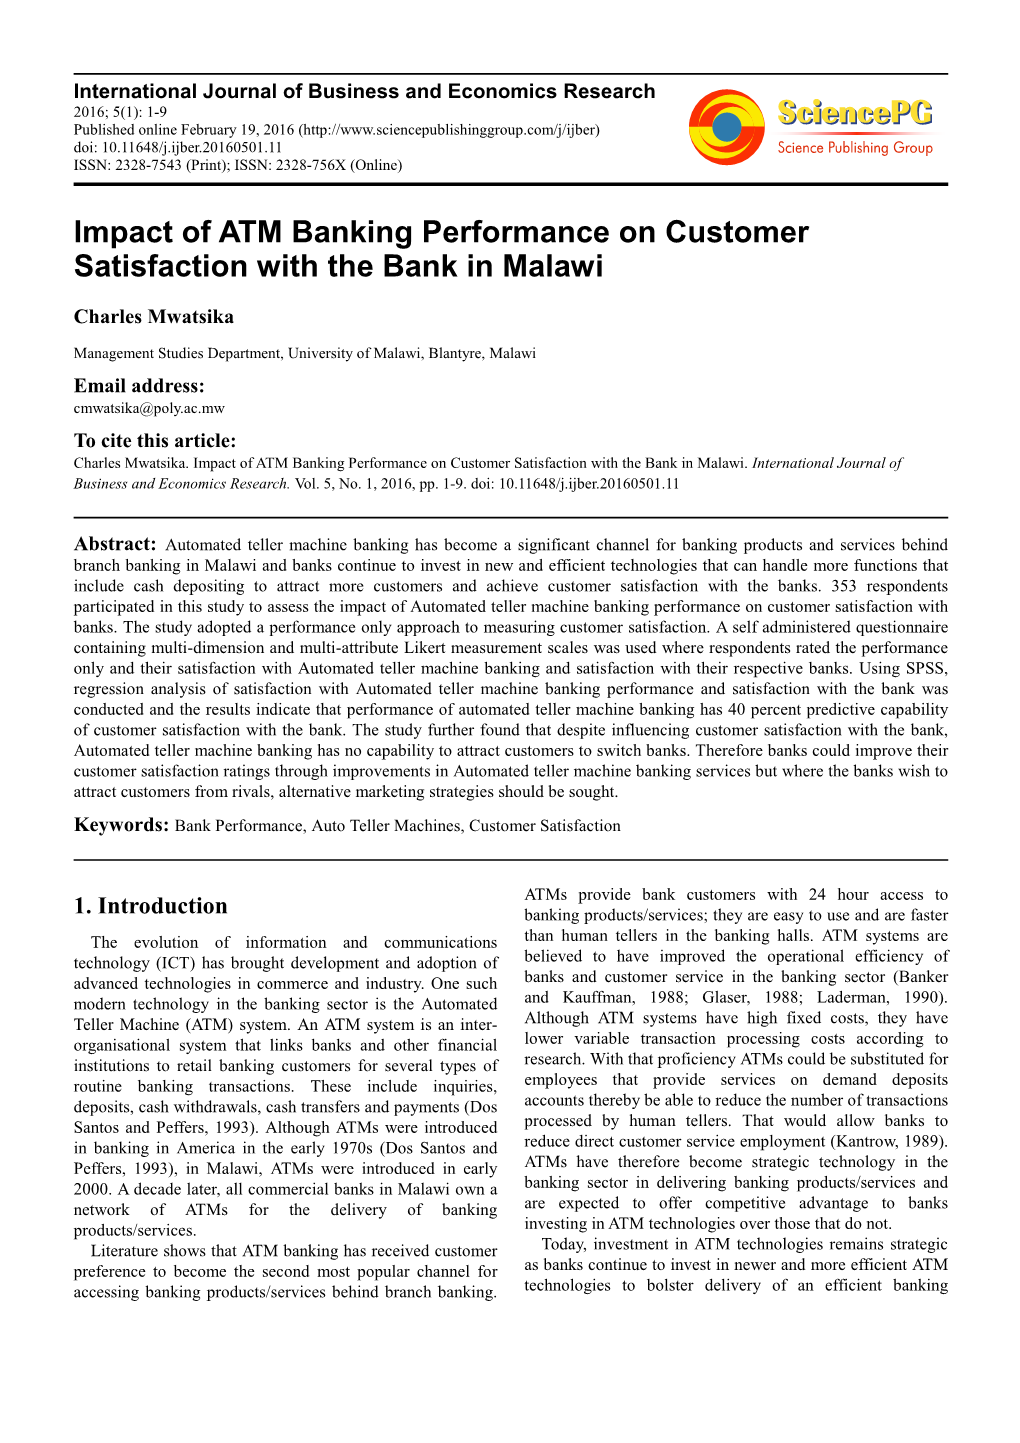 Impact of ATM Banking Performance on Customer Satisfaction with the Bank in Malawi